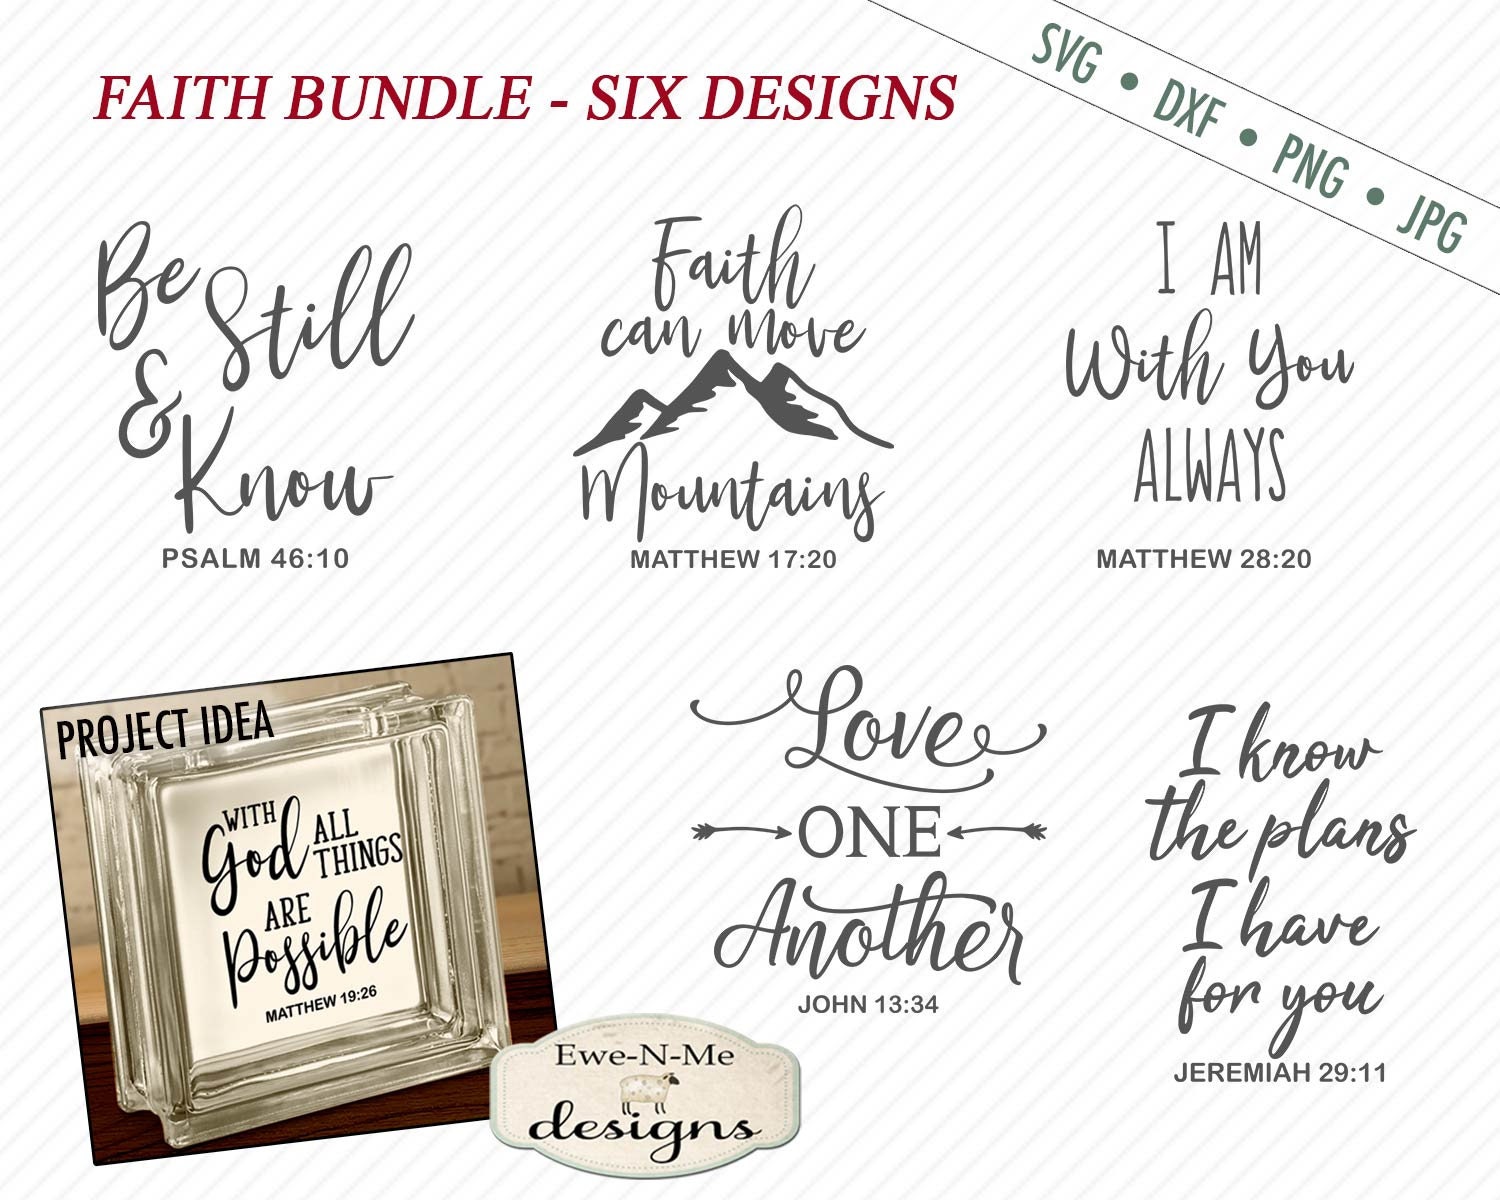 FREE Glass Block SVG Files to Make a Loving Gift or Decoration! - Leap of  Faith Crafting